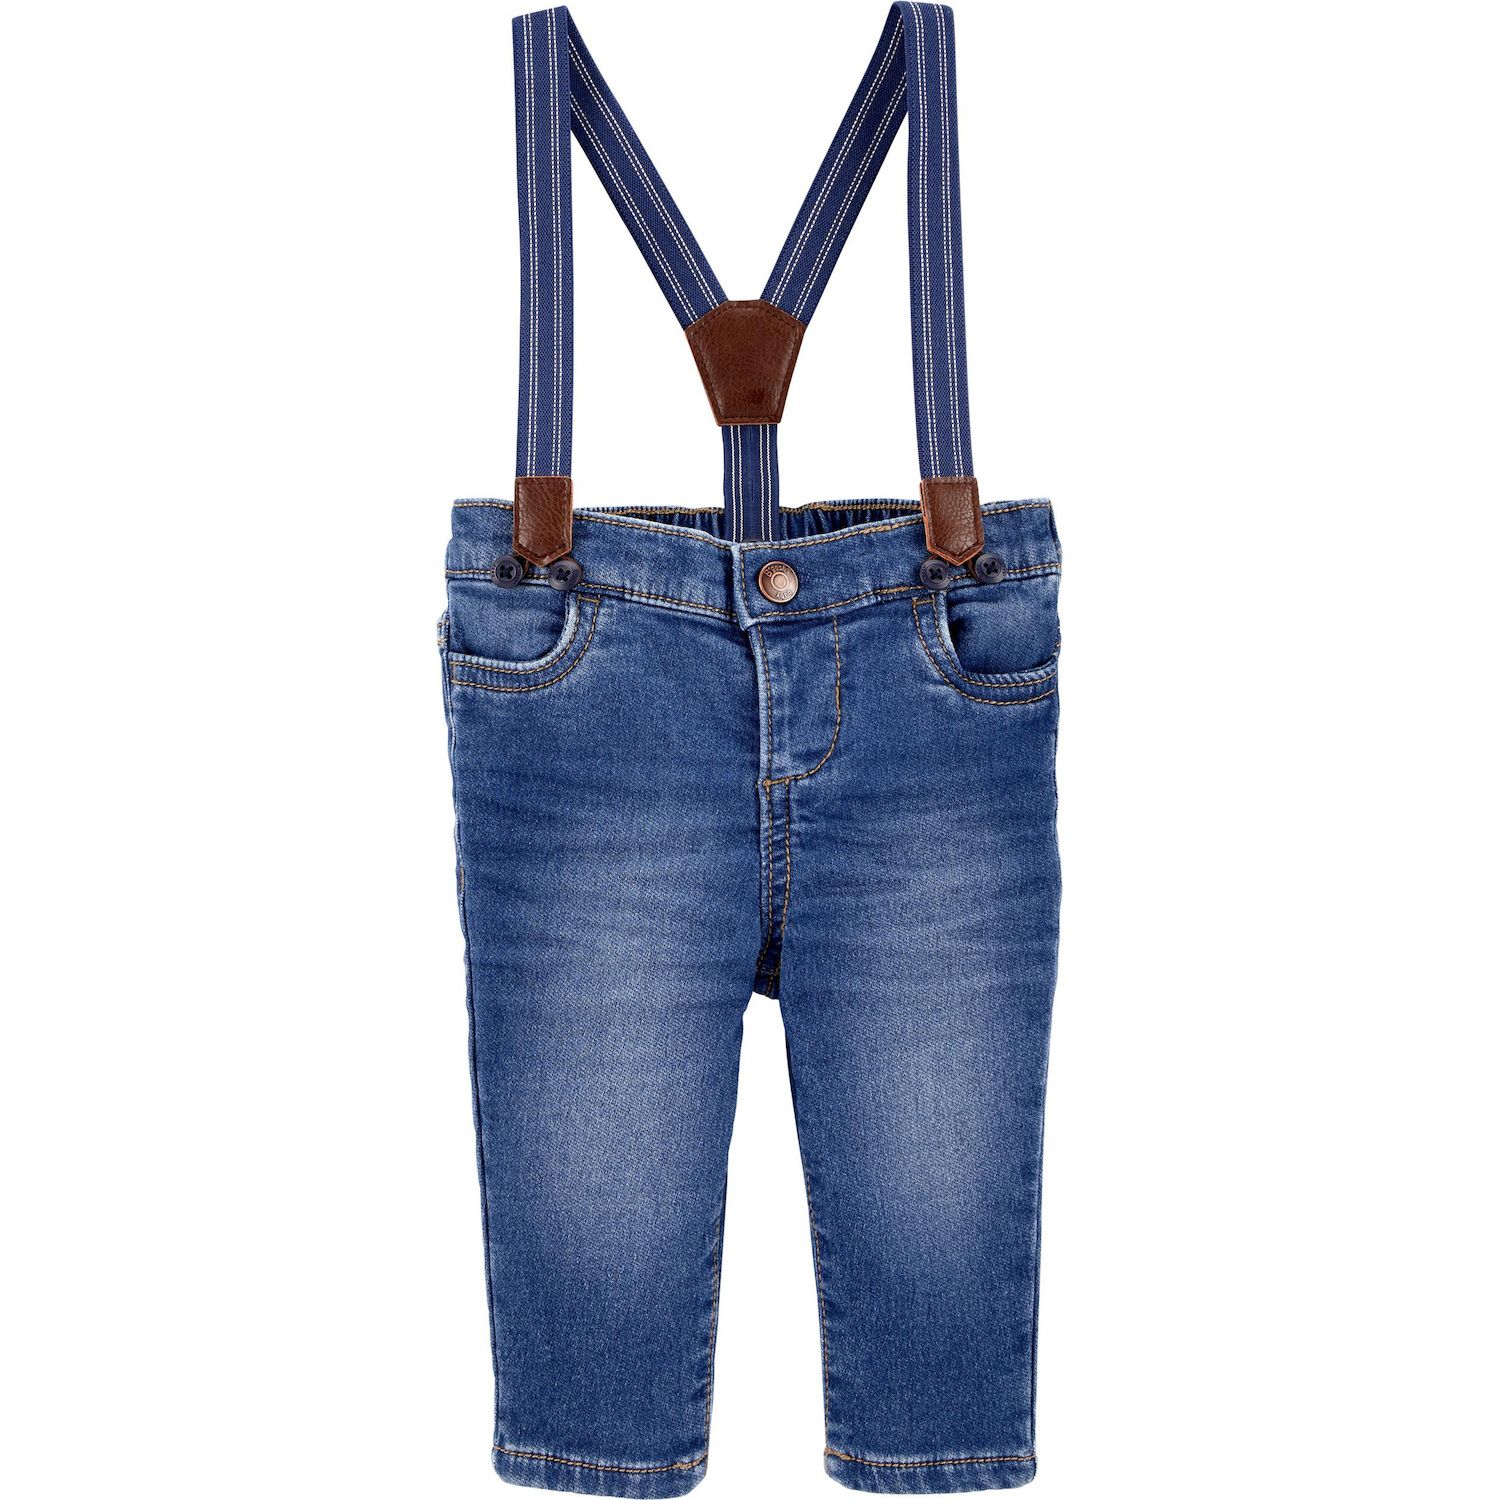 jeans for 1 year old boy